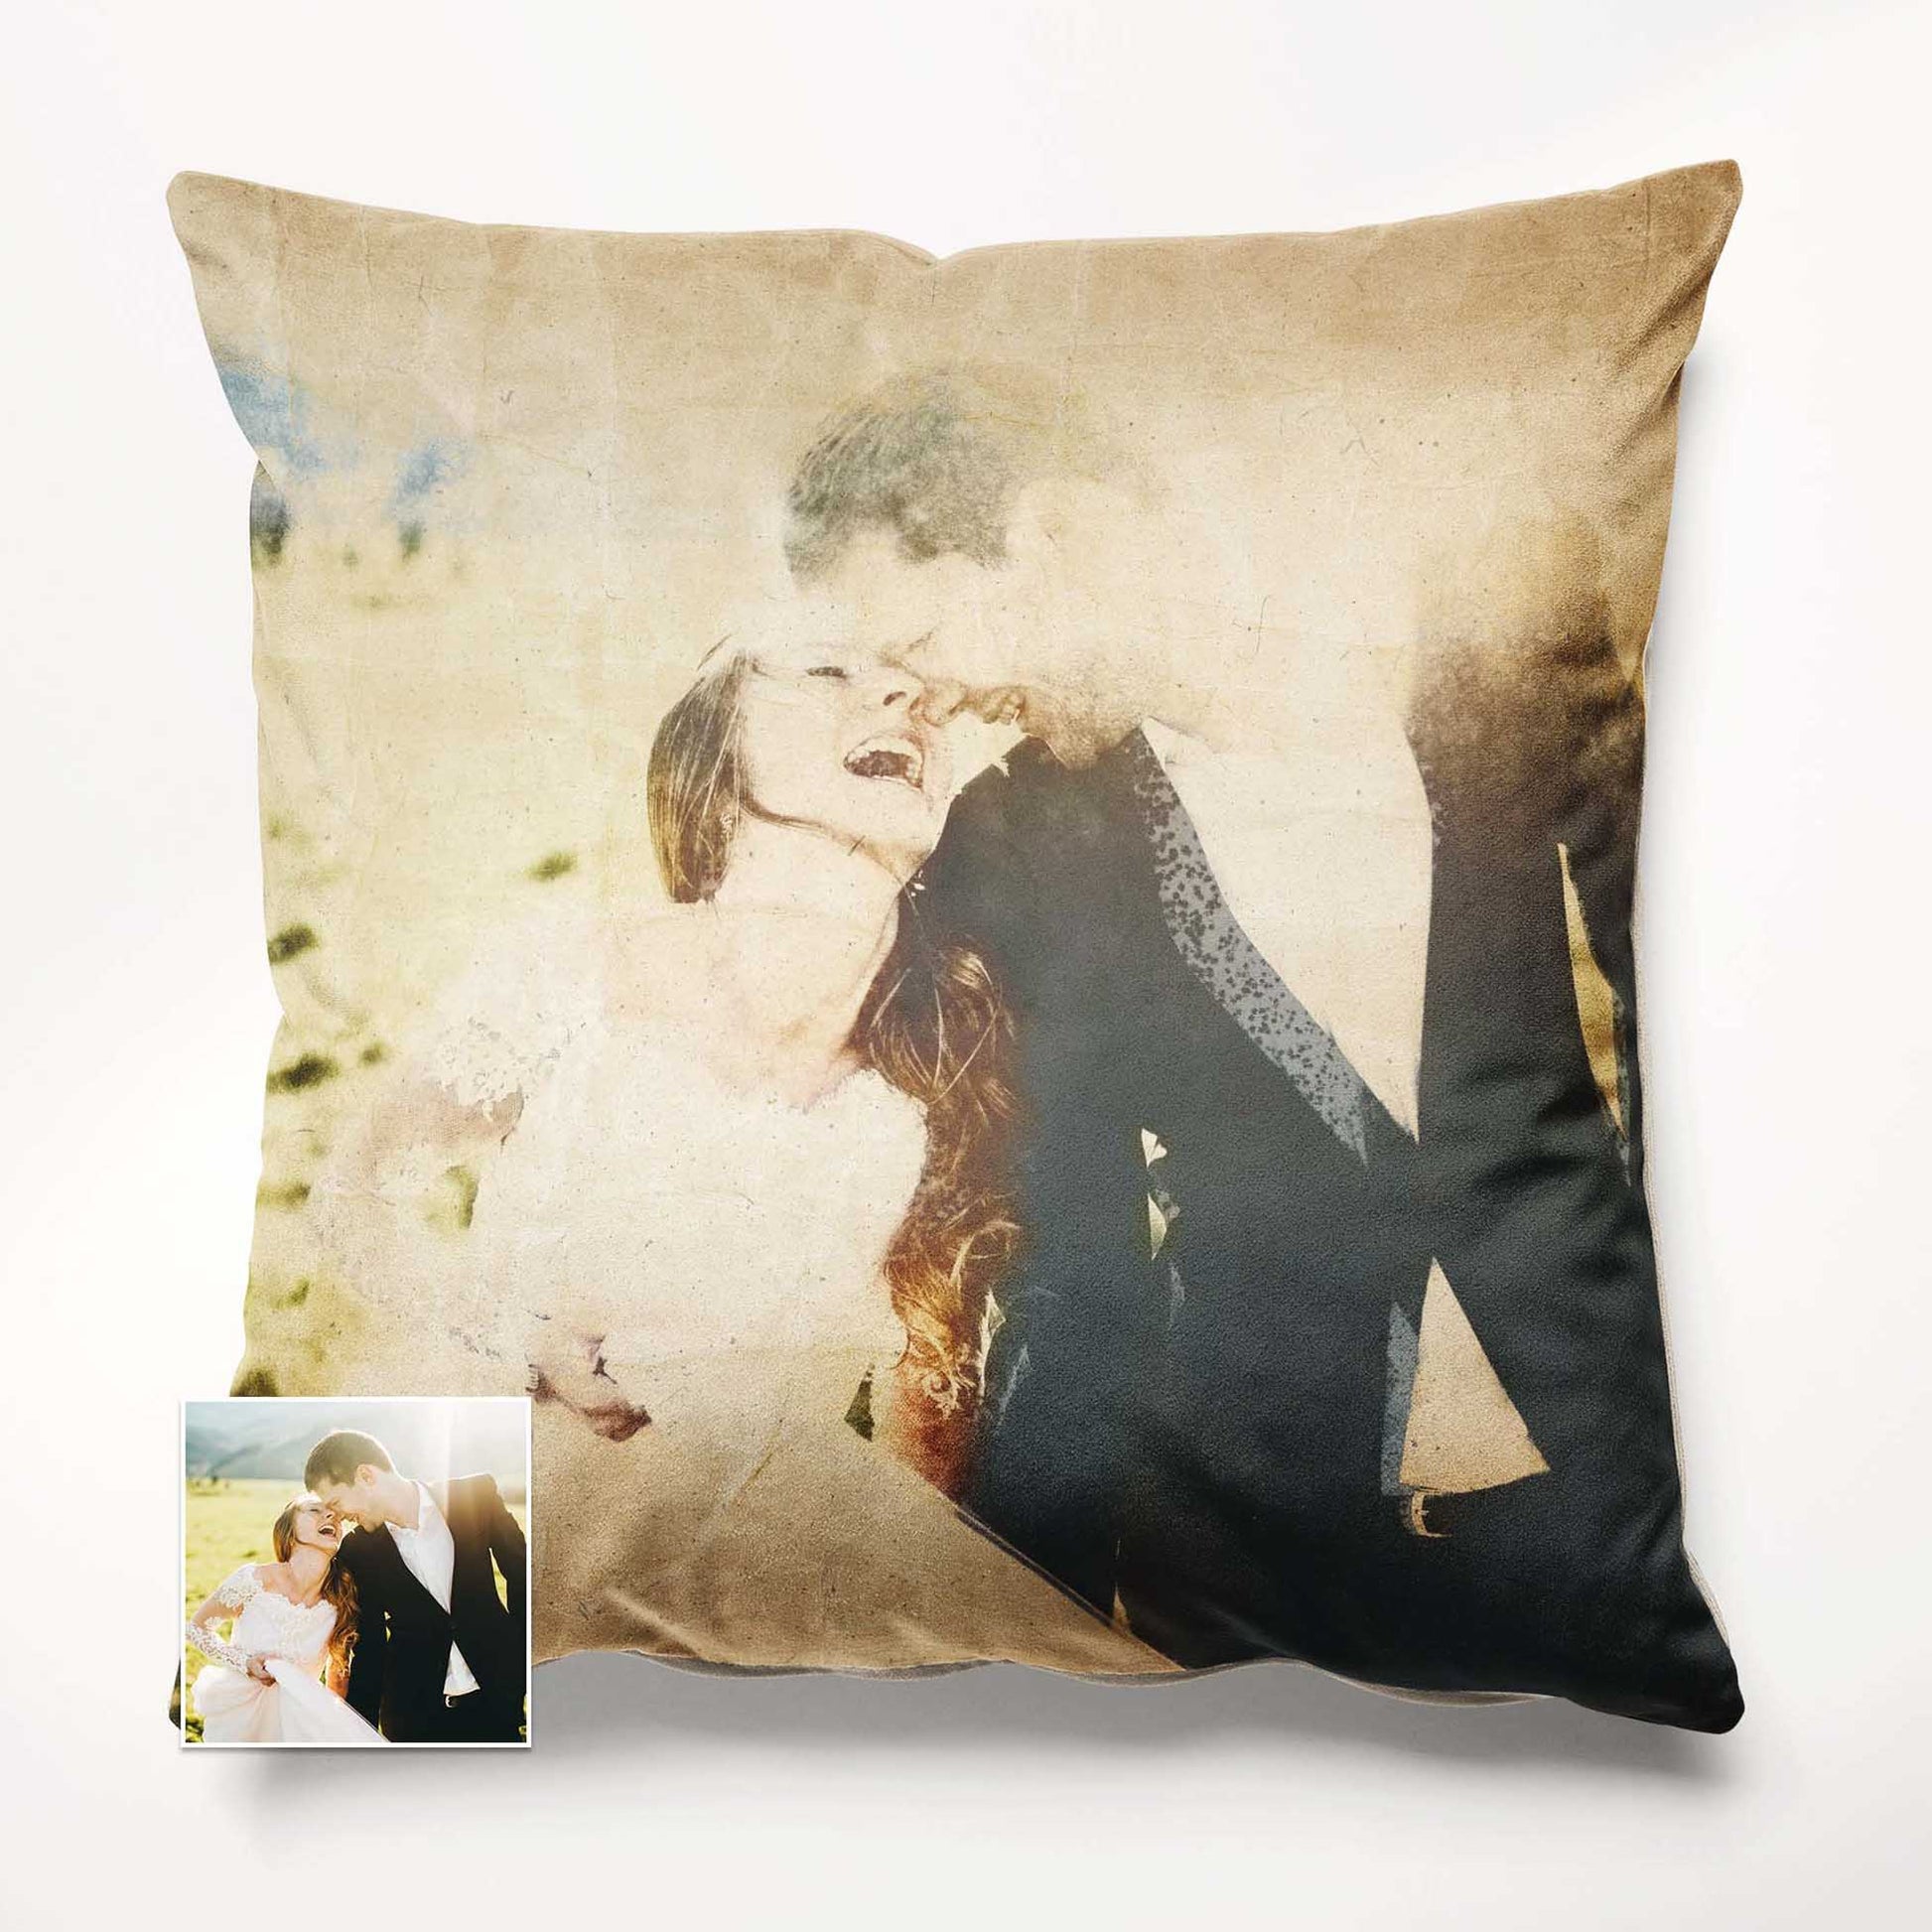 Add a touch of vintage charm to your home decor with the Personalised Vintage Gouache Cushion. Featuring a painting created from your photo using watercolour technique, it exudes an authentic and real artistic essence, handmade